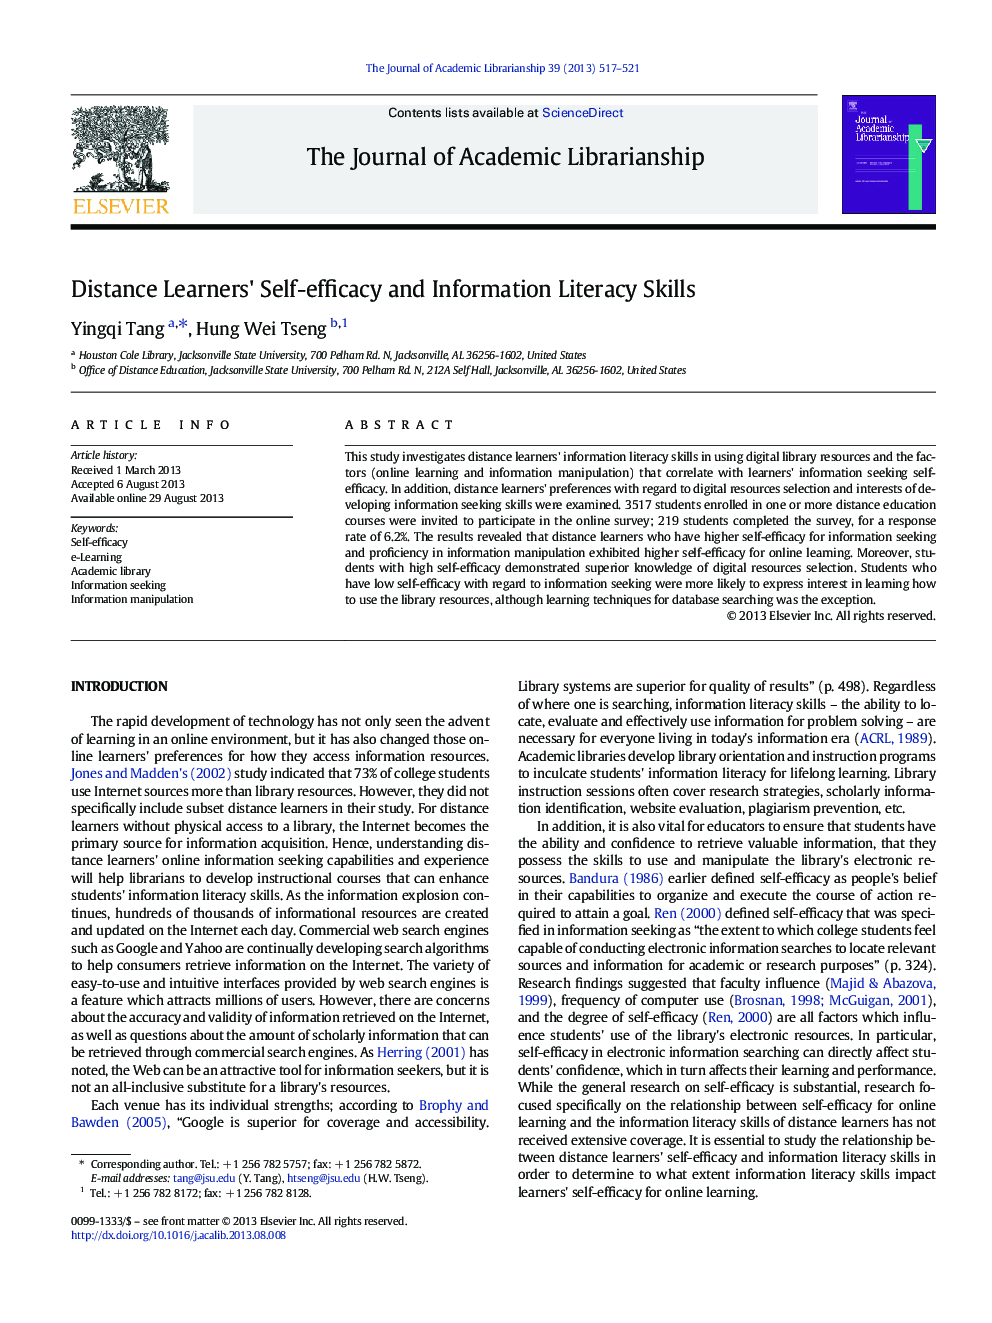 Distance Learners' Self-efficacy and Information Literacy Skills